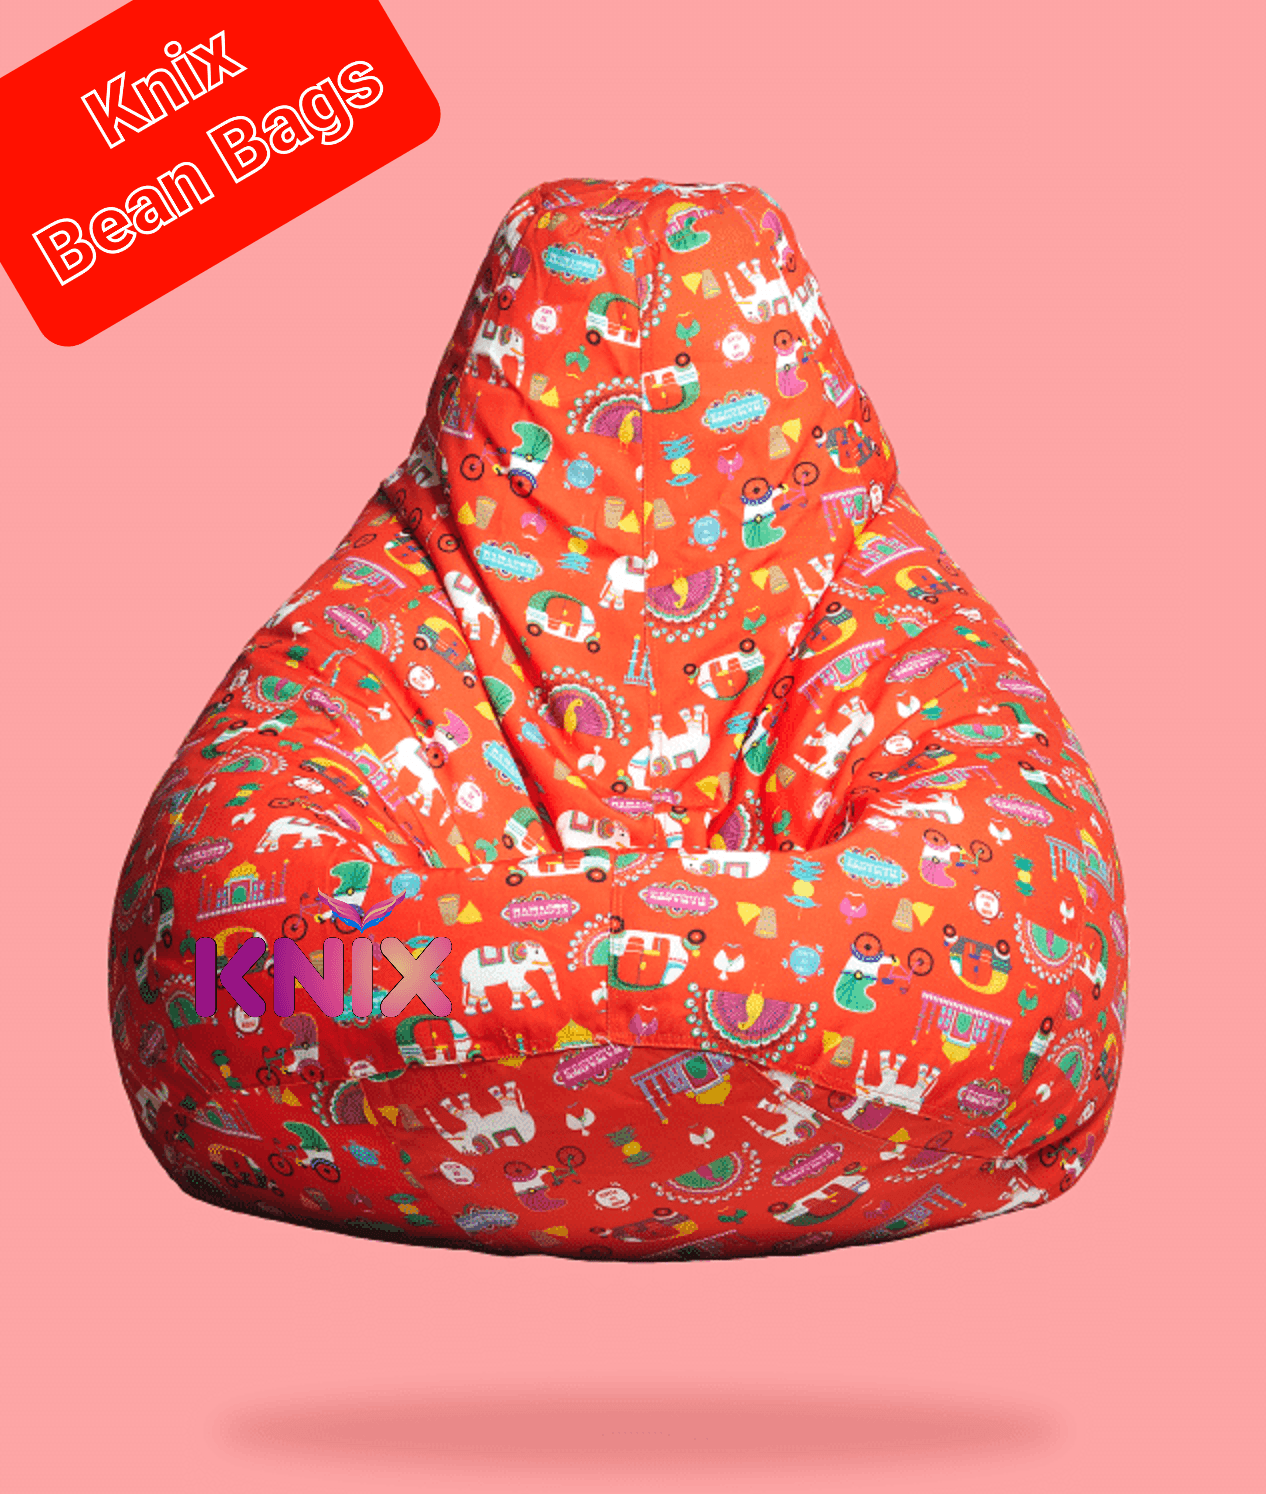 Bean Bag Cover Military XXXL Printed Fabric Without Beans (Green Military  Print) | eBay